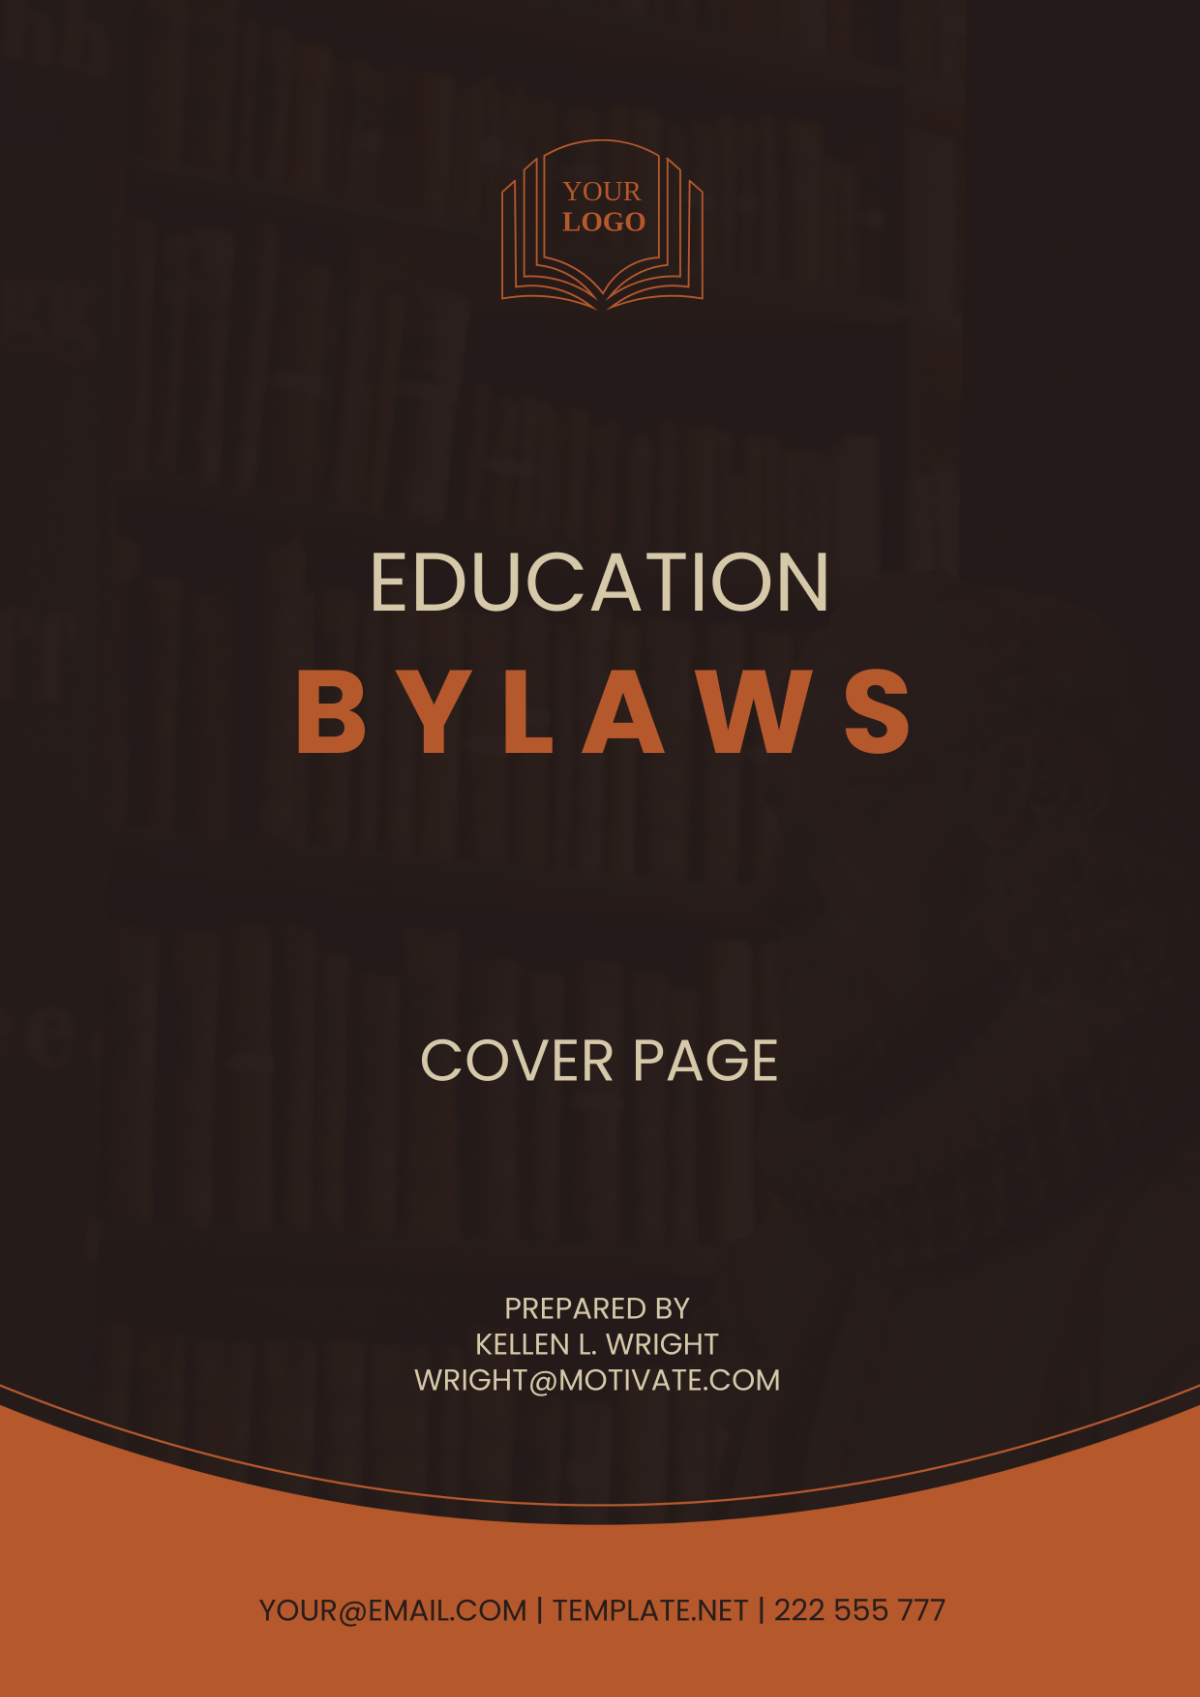 Education Bylaws Cover Page Template